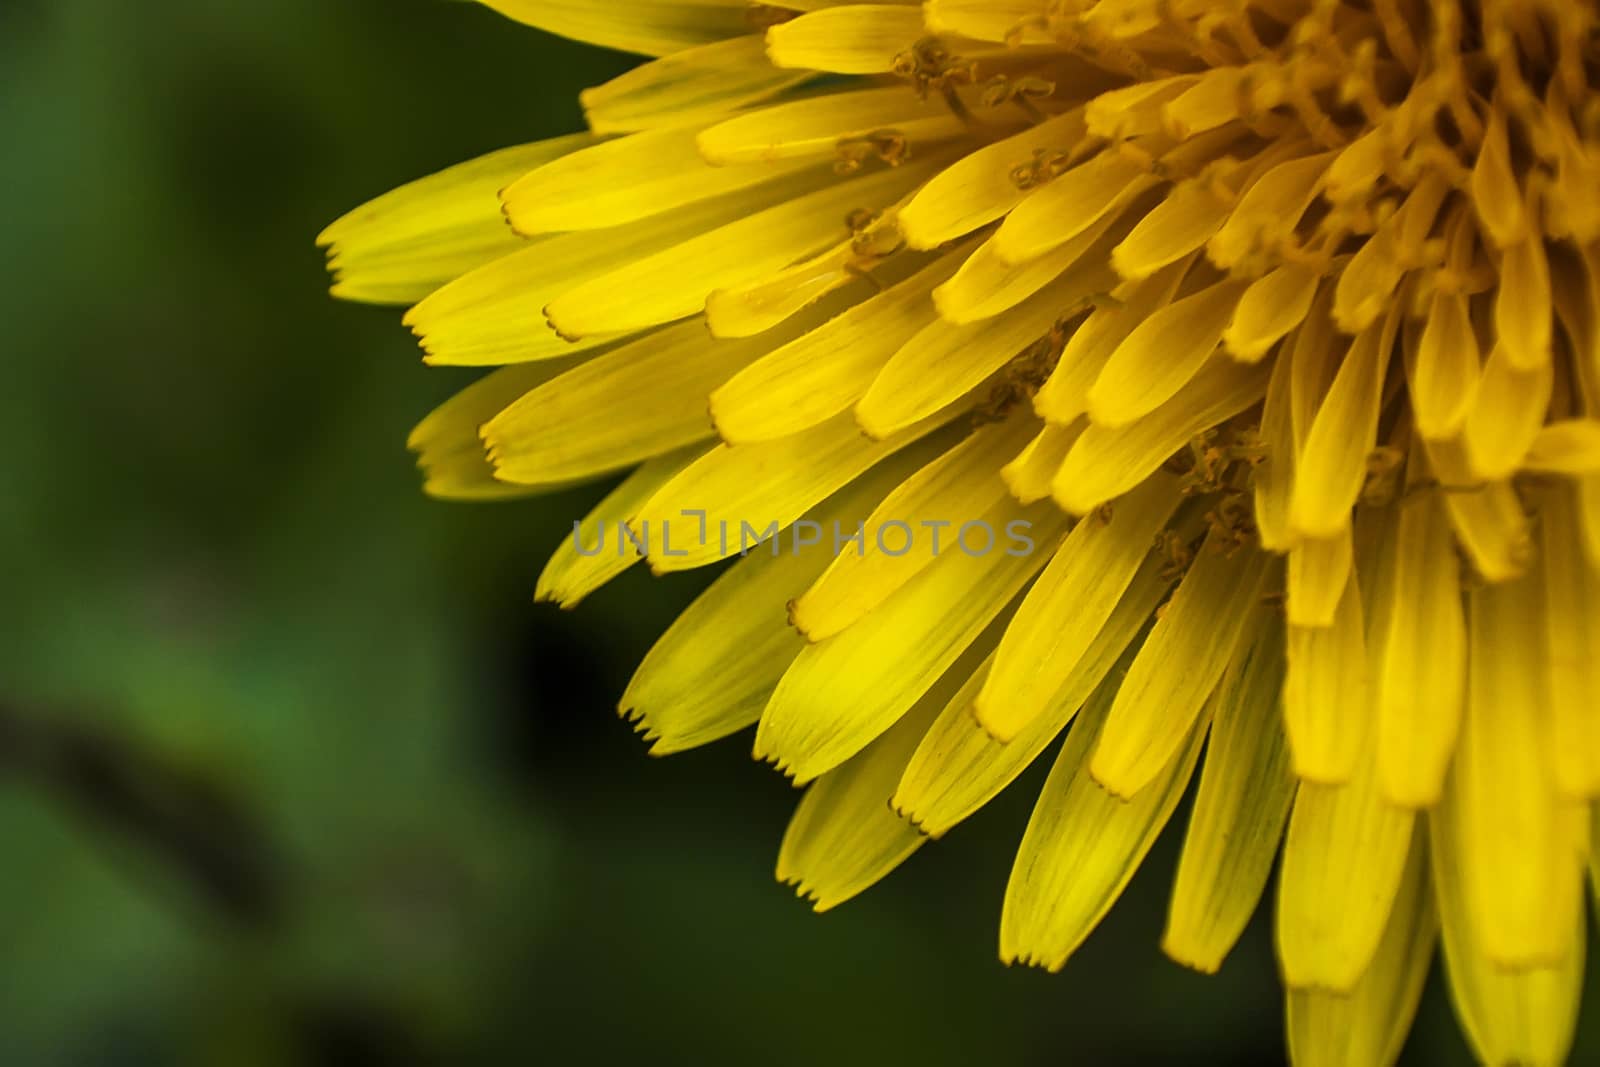 Details of flower petals of Taraxacum. A macro photography to show the details and colors of this flower.